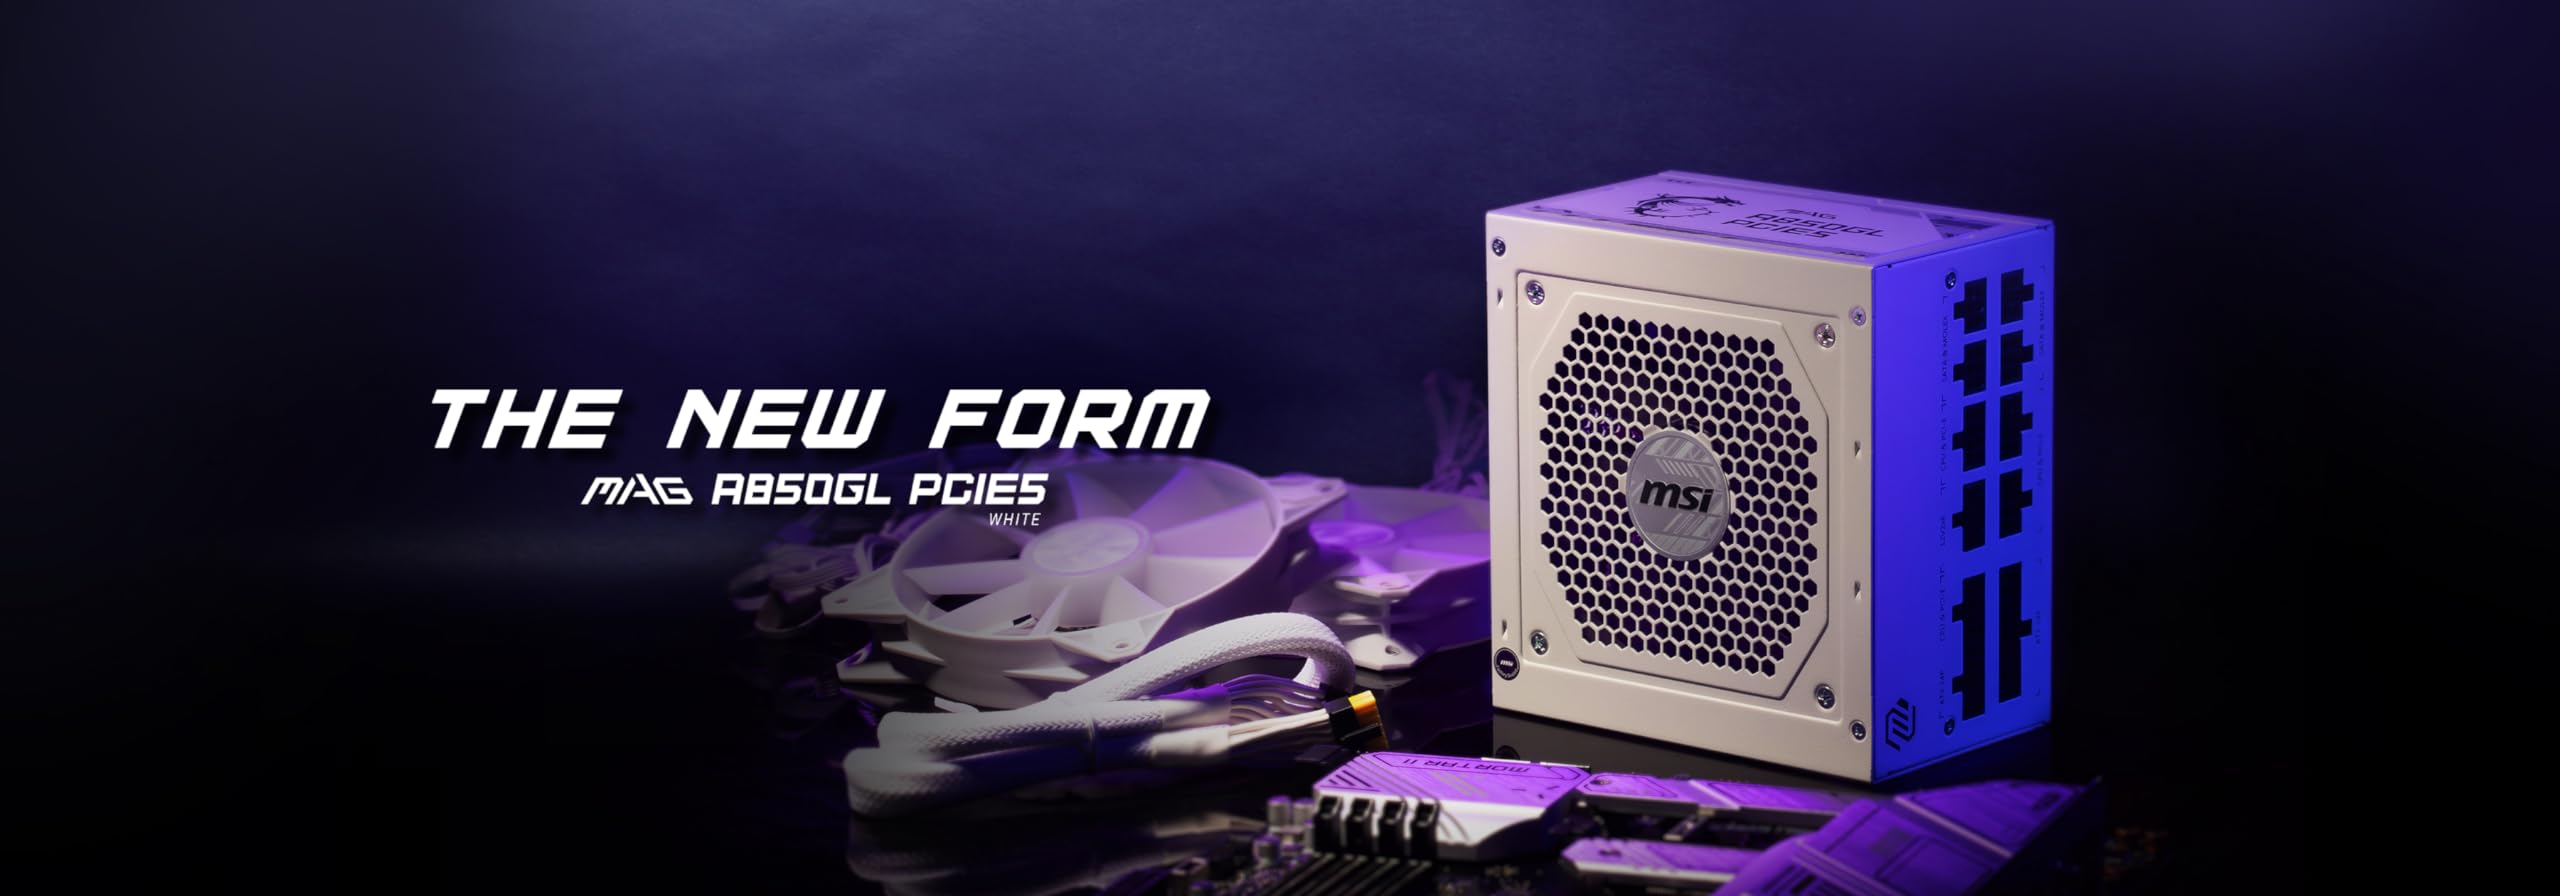 MSI MAG 850GL PCIE 5 White Gaming Power Supply - Full Modular - 80 Plus Gold Certified 850W - Compact Size - ATX PSU